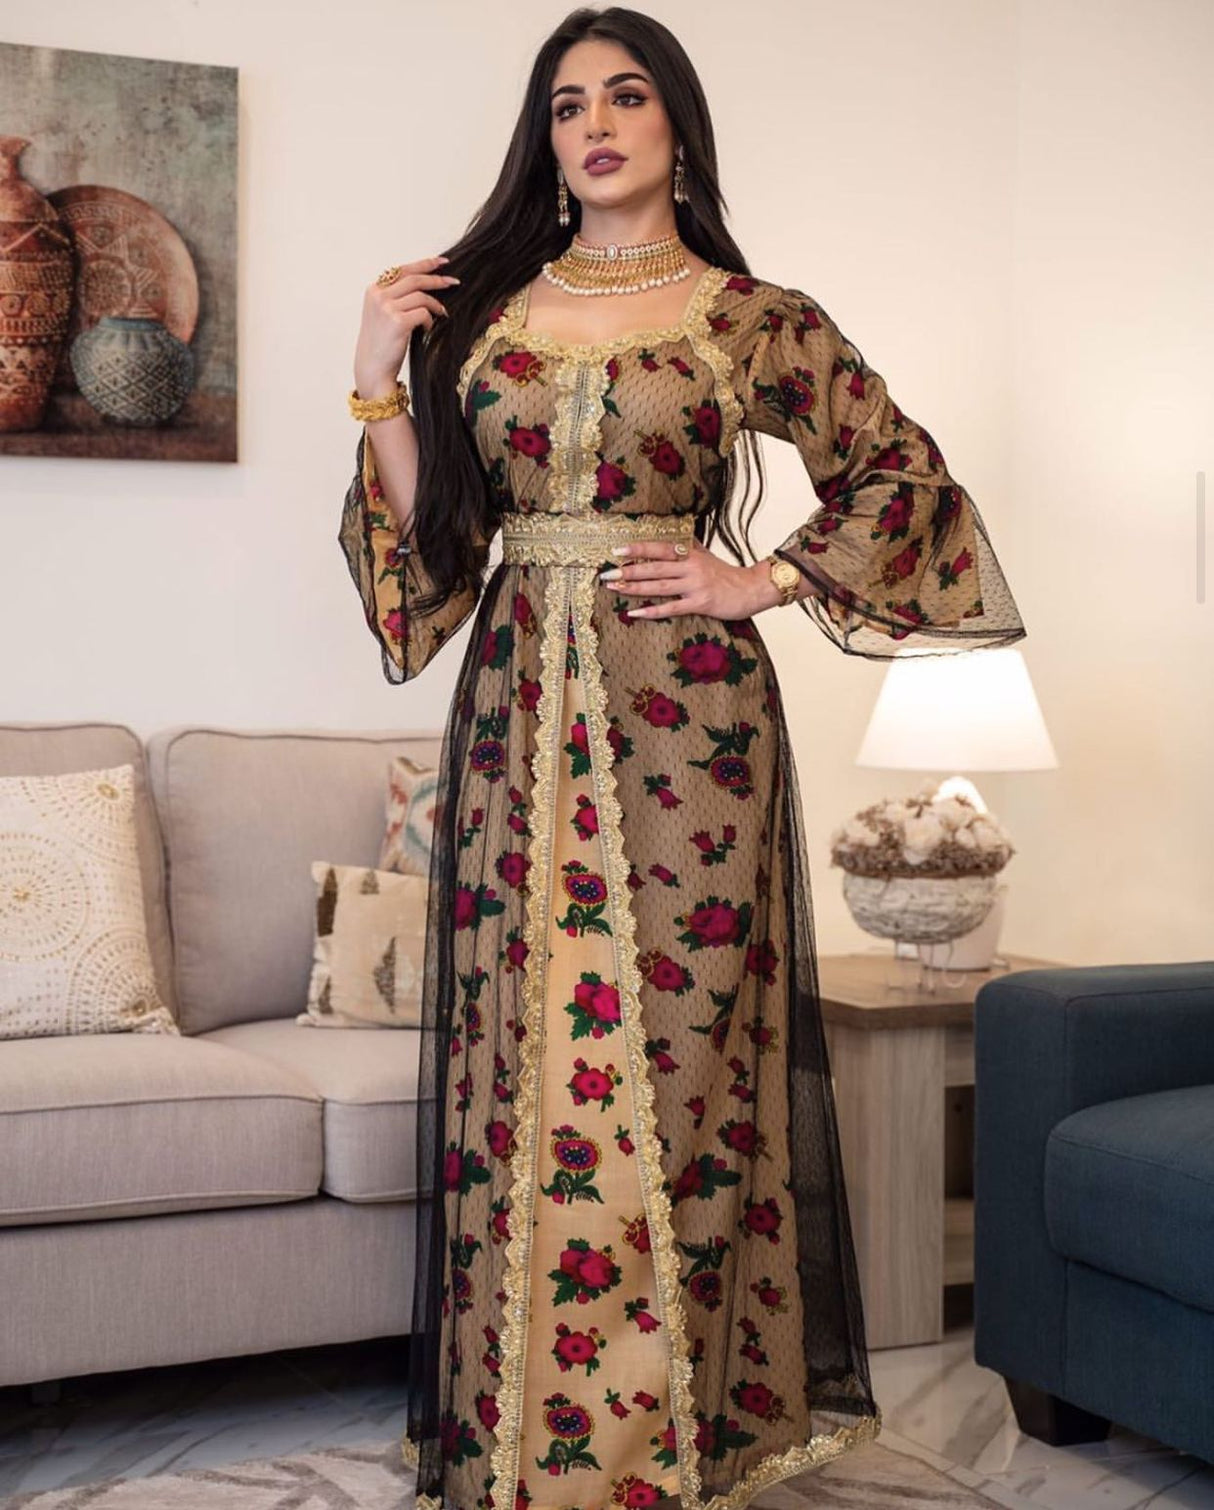 Jalabiya with a traditional design in a modern way, with a floral print, long sleeves, and a layer of black tulle